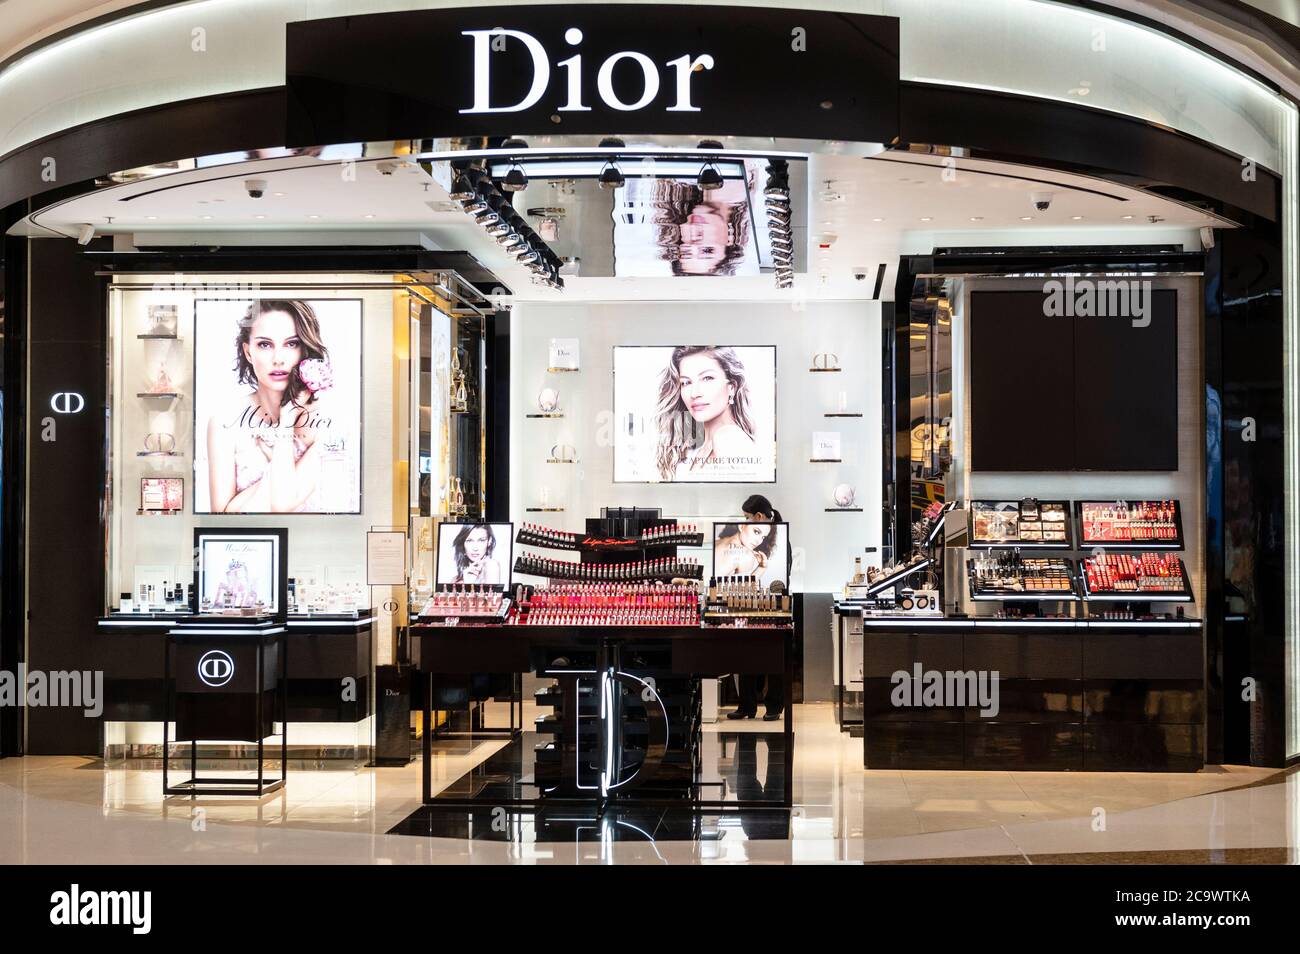 French Christian Dior luxury goods, clothing and beauty products store ...